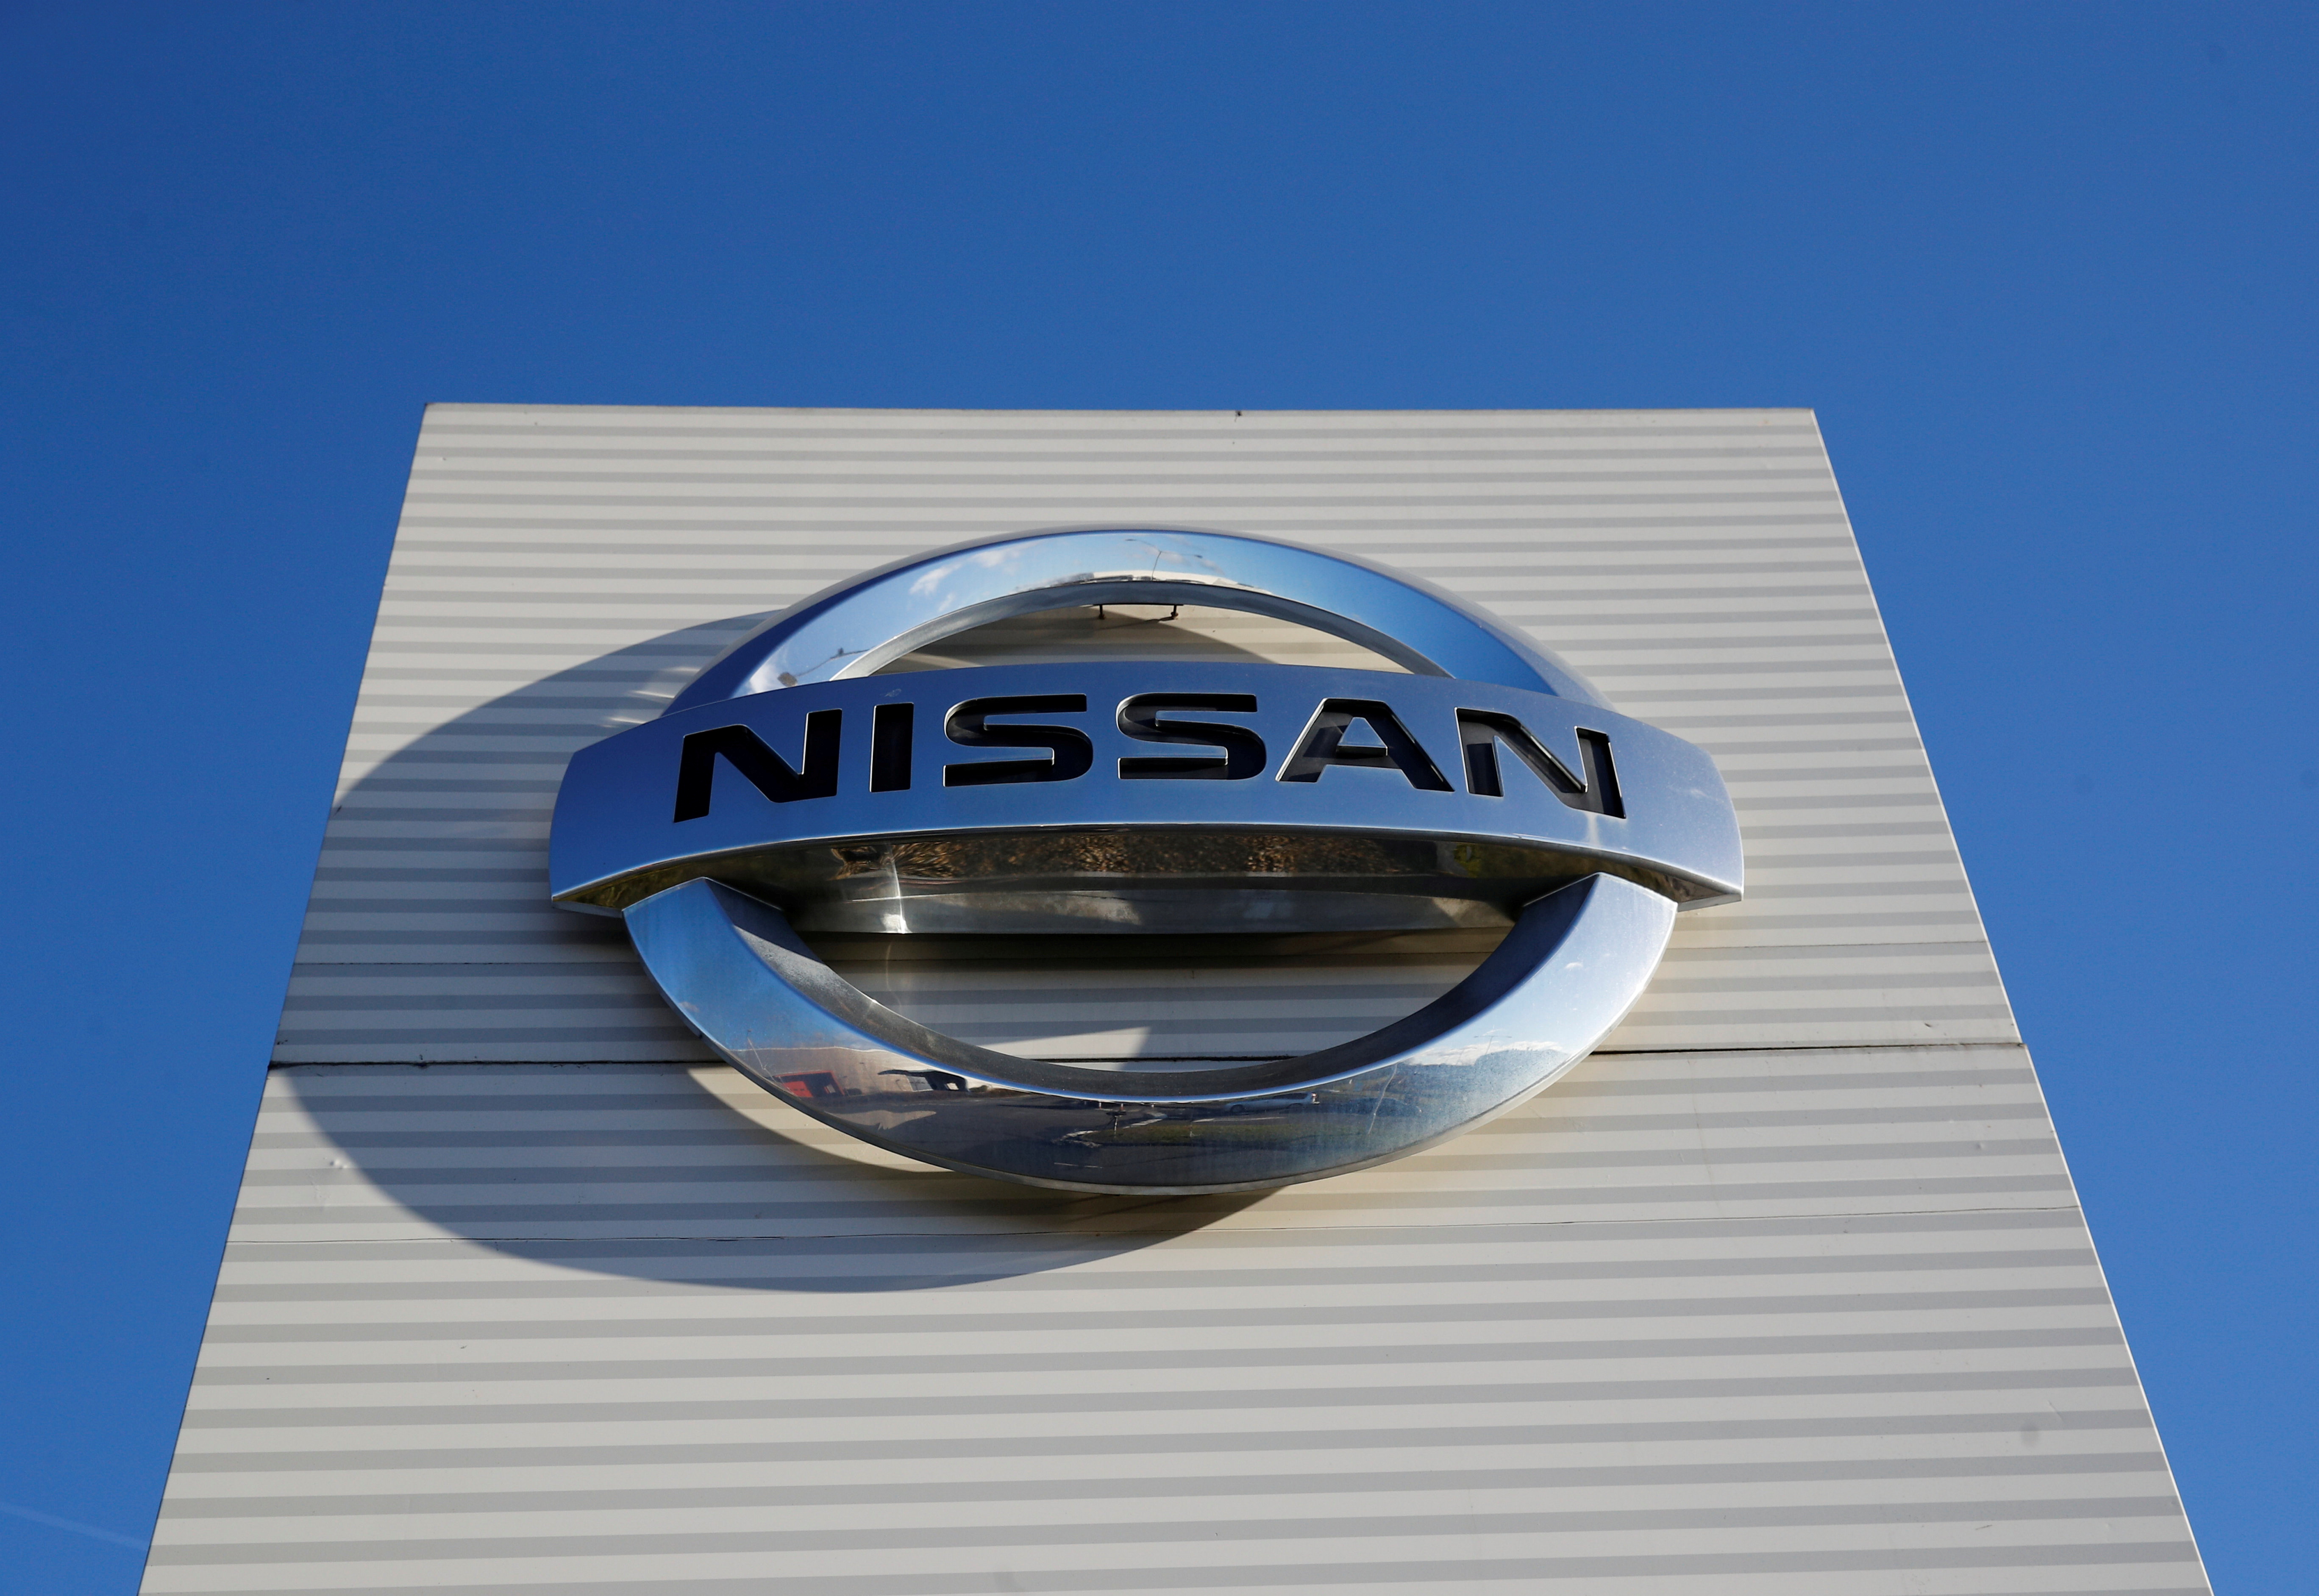 The Nissan logo is seen at Nissan car plant in Sunderland